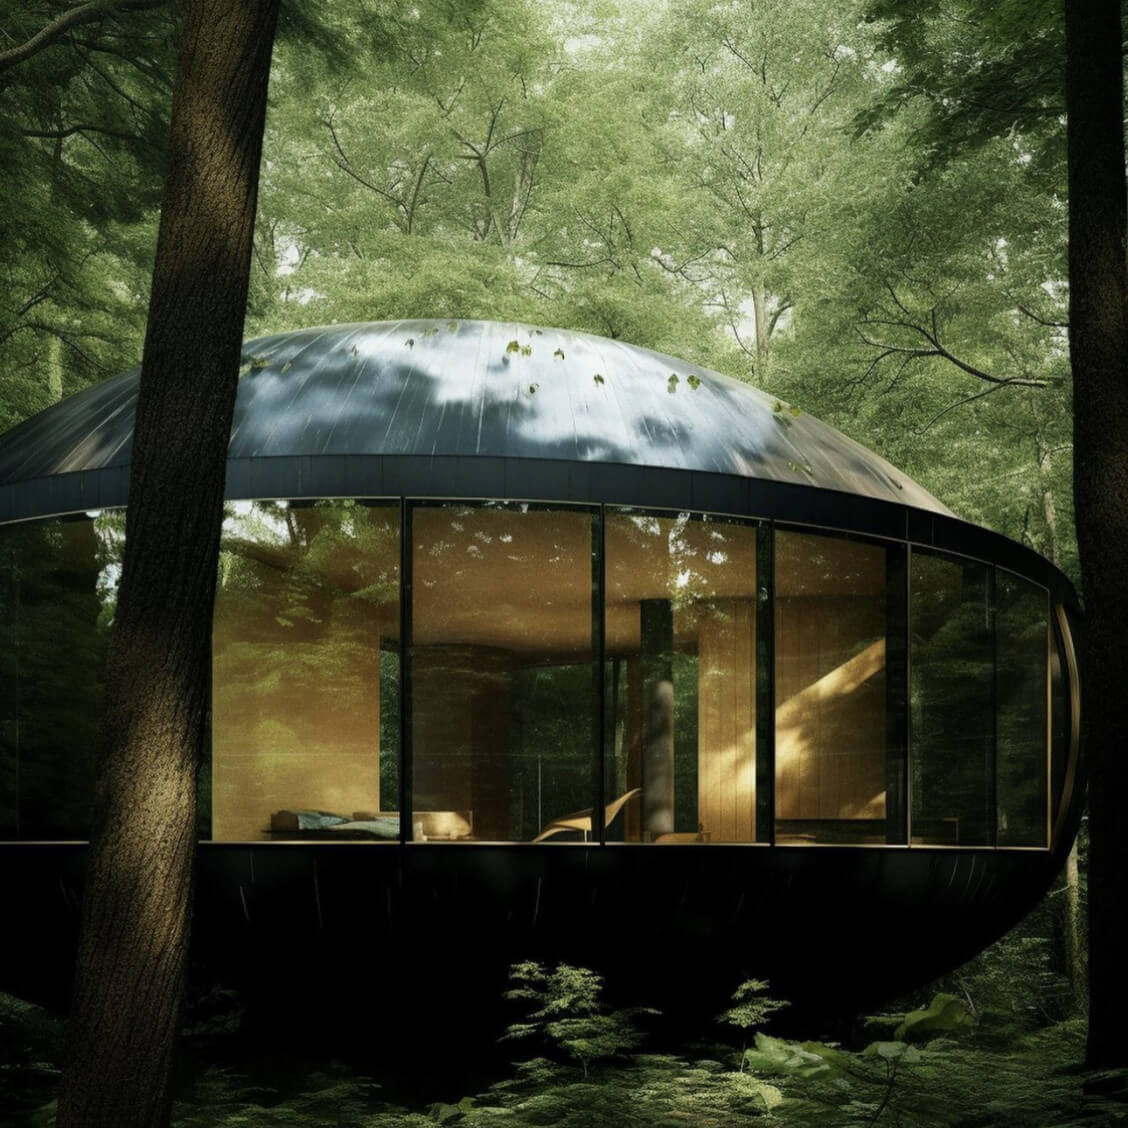 [in] session blog - its 420 circular house in forest